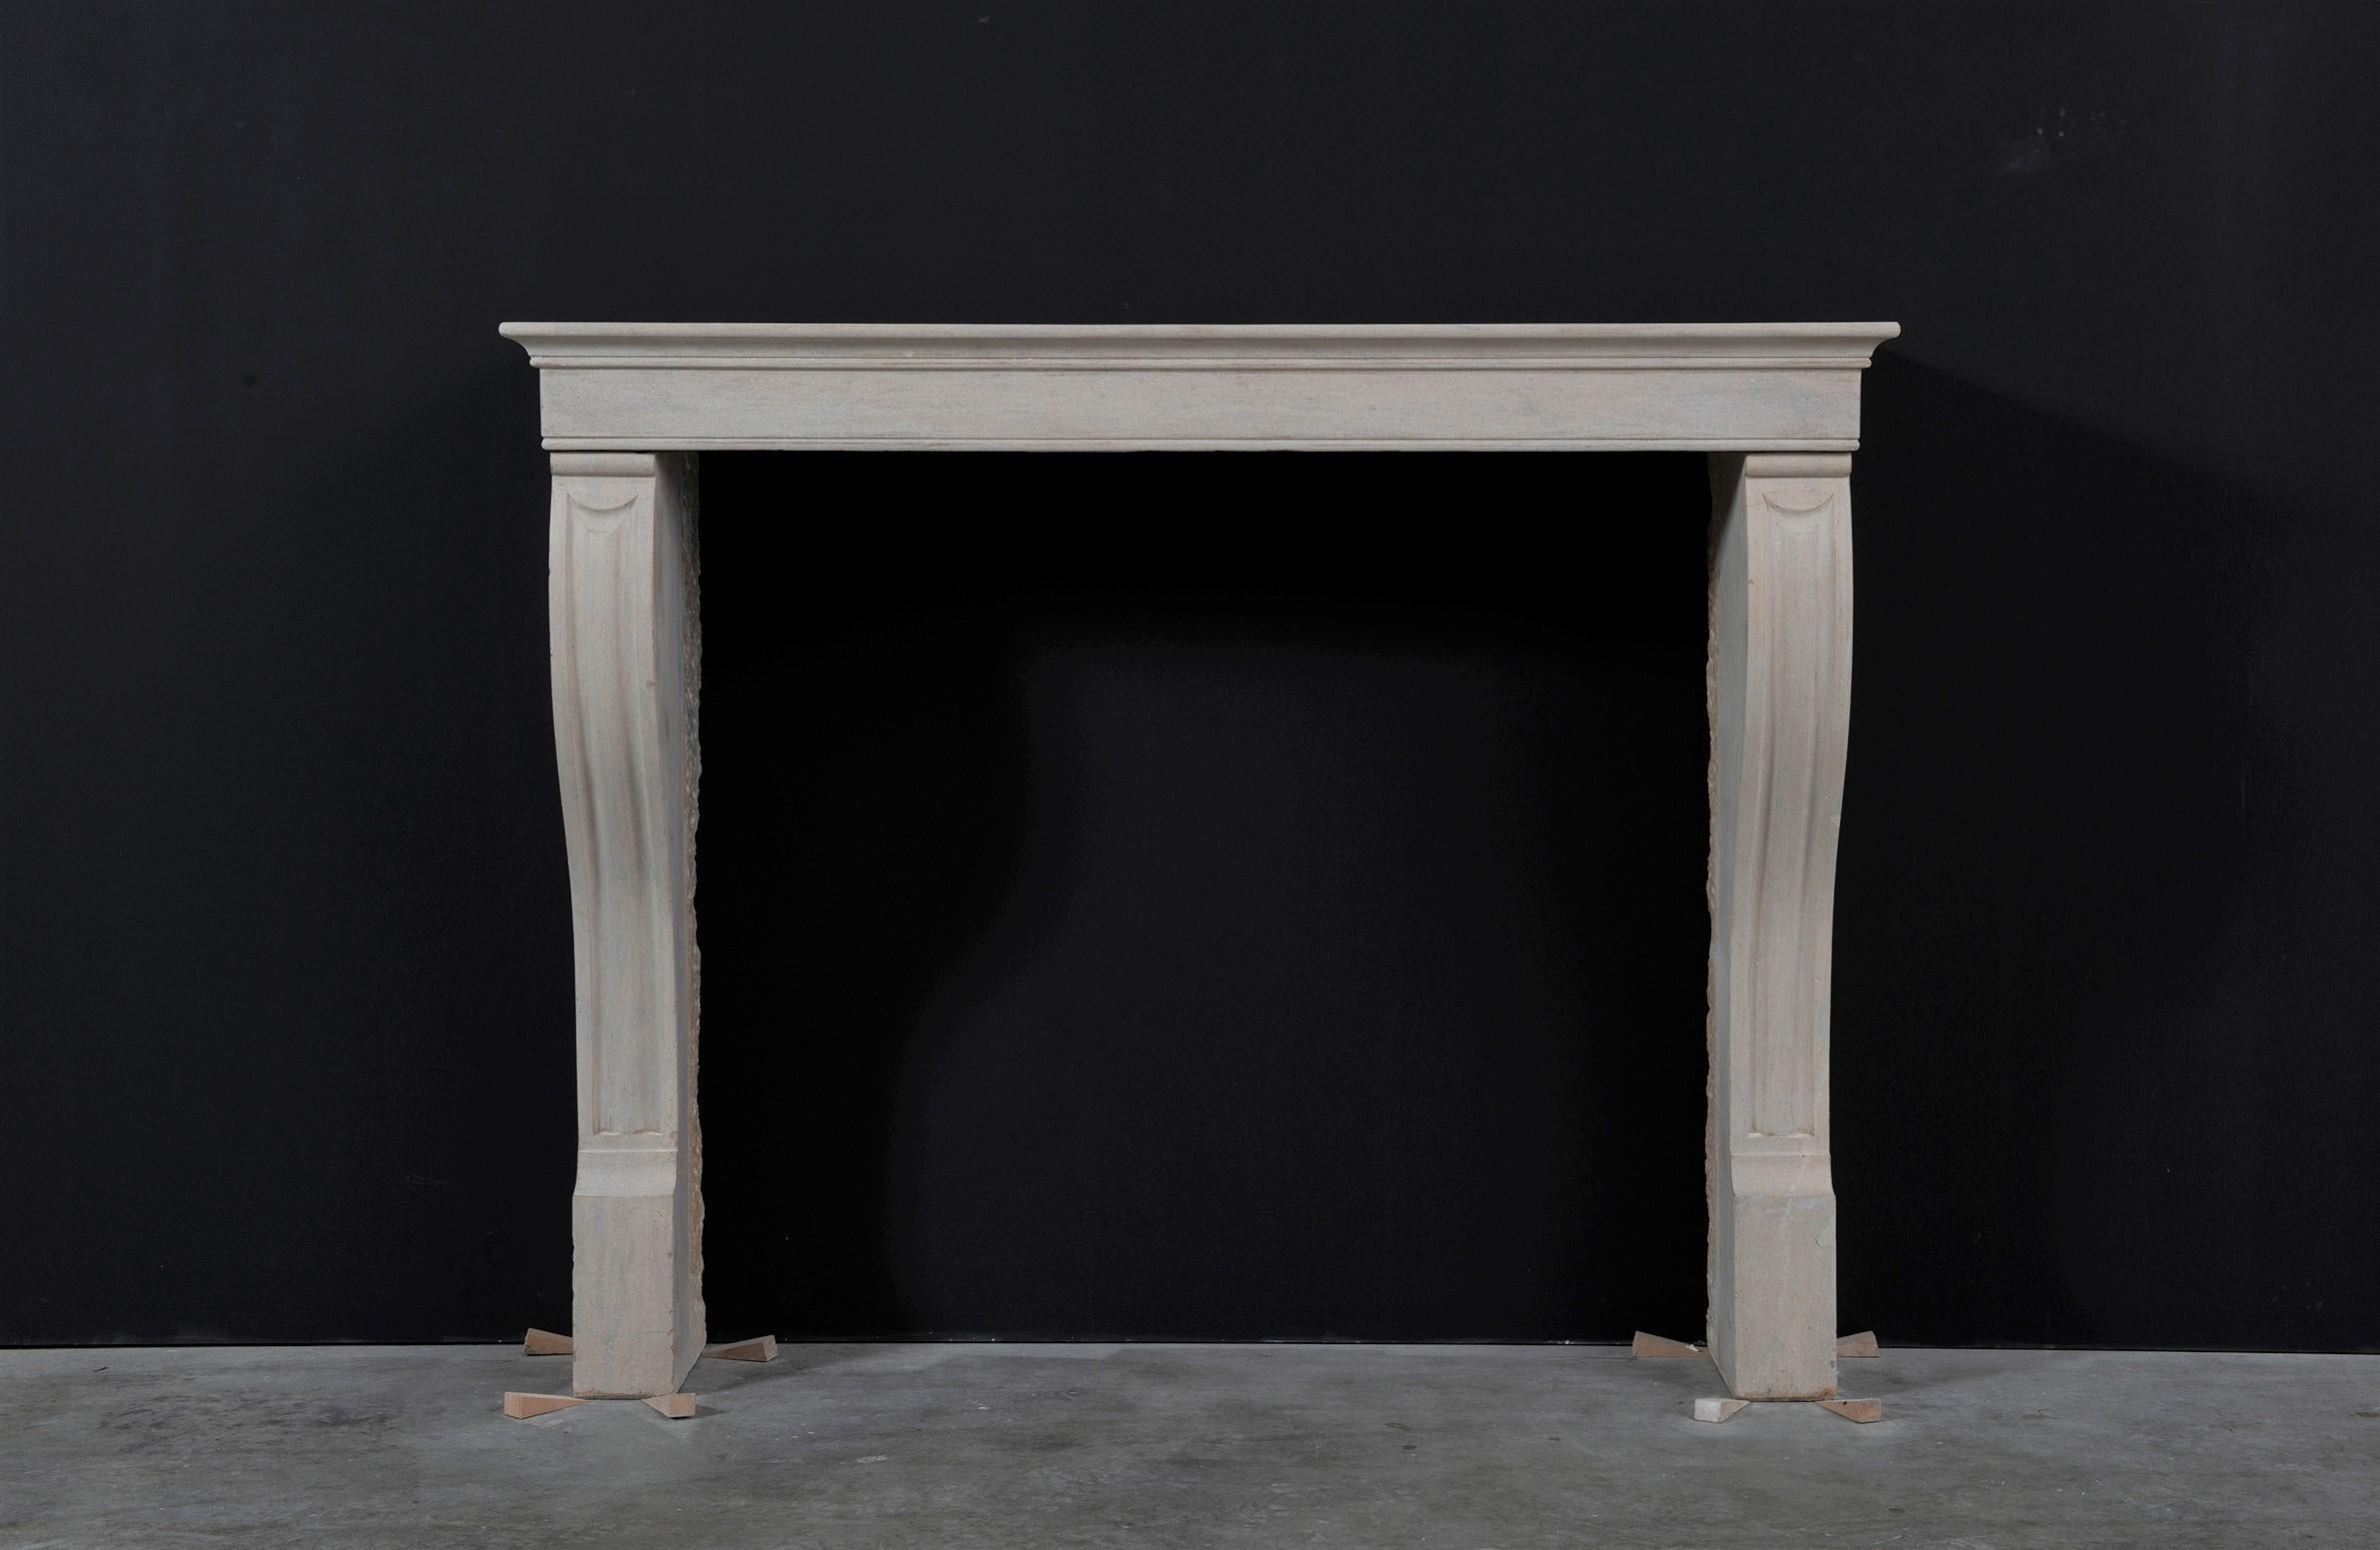 Nice French Campagnard style fireplace mantel in lovely limestone.
This gem comes from central France, burgundy area.
Its perfect size make it possible to install this mantel in almost any situation, the two slender panneled legs support a nice